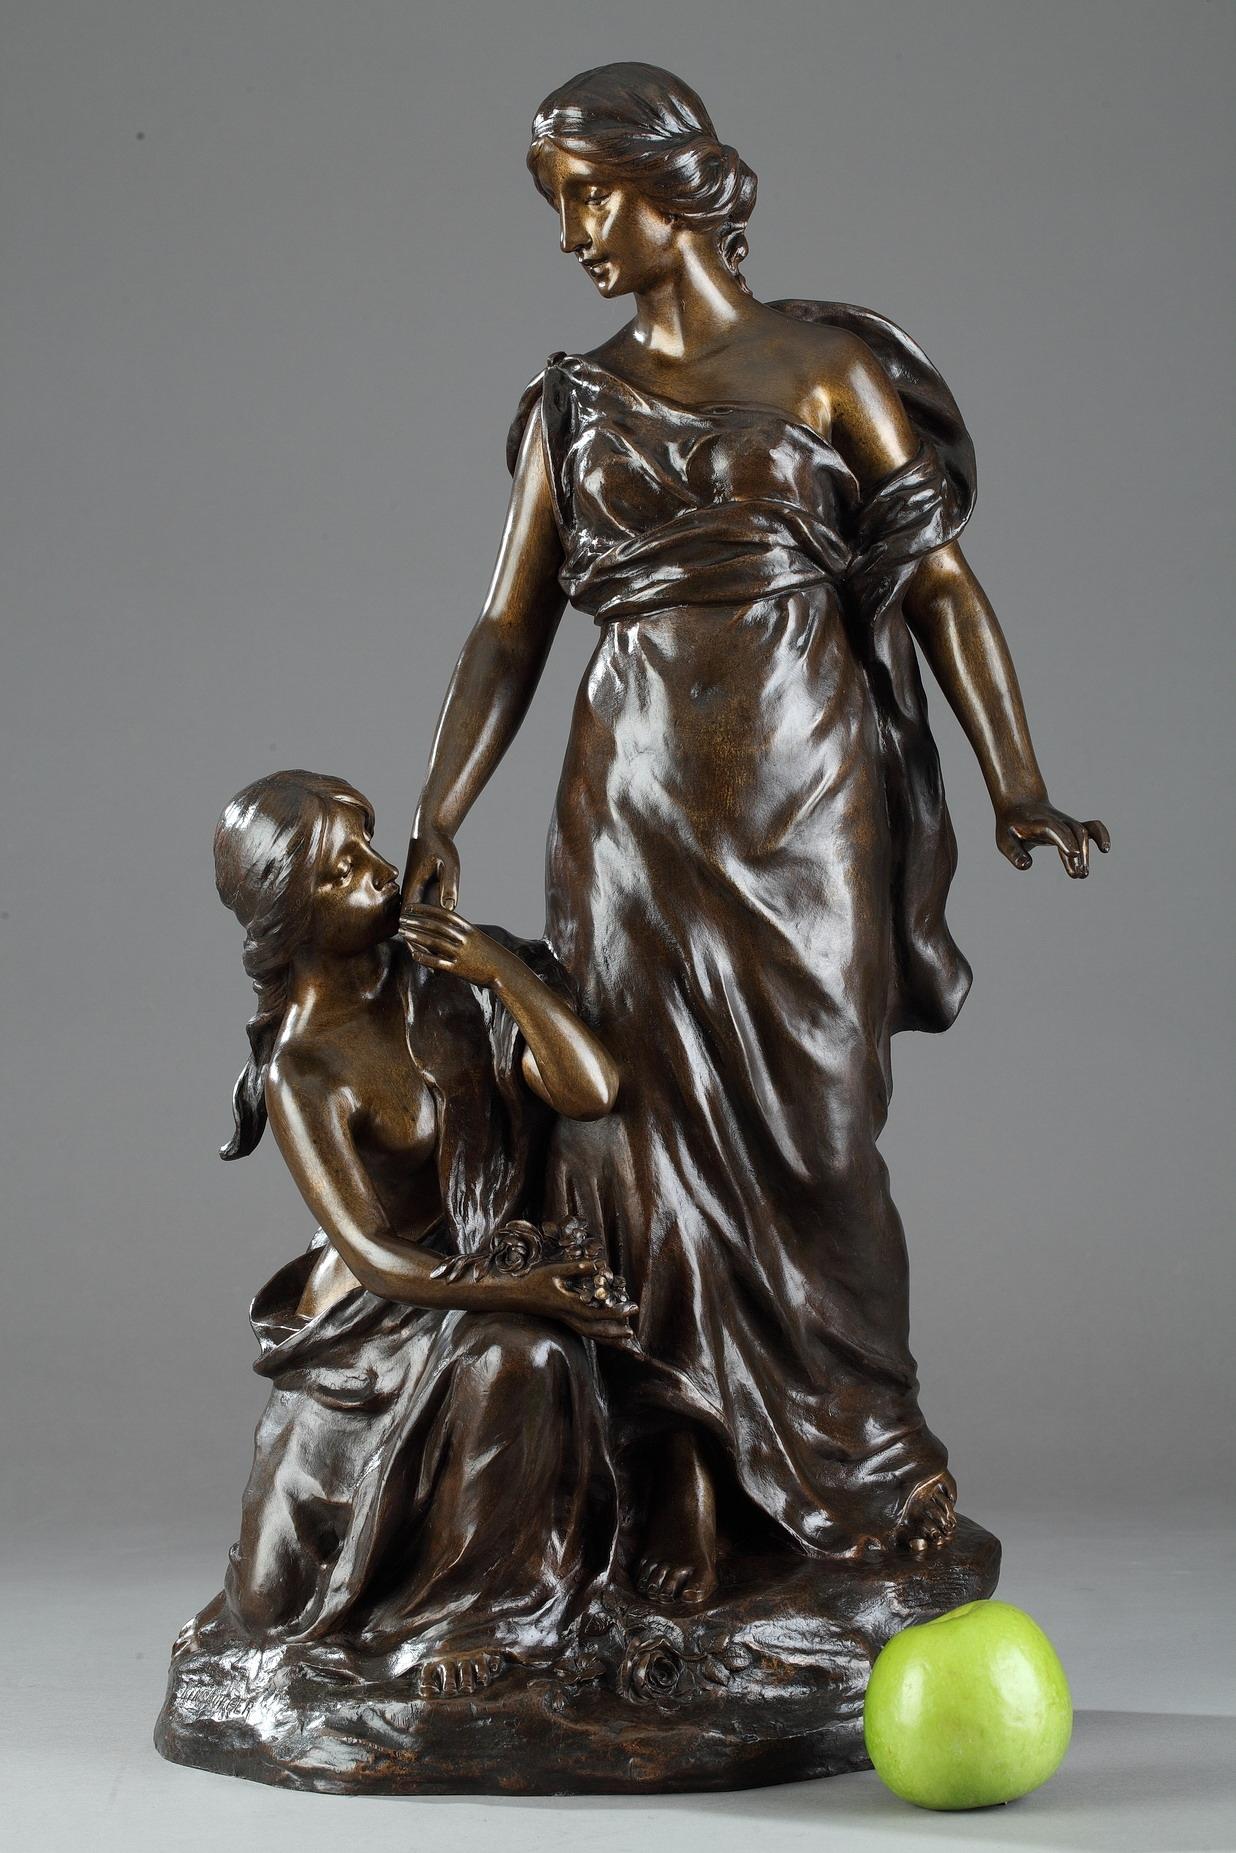 Late 19th century bronze group featuring two young women with flowers on a small naturalistic terrace. Signed on the terrace: KINSBURGER. Sculptor and engraver in medals, Sylvain Kinsburger (1855-1935) presented to the Paris Salon from 1878 onward,